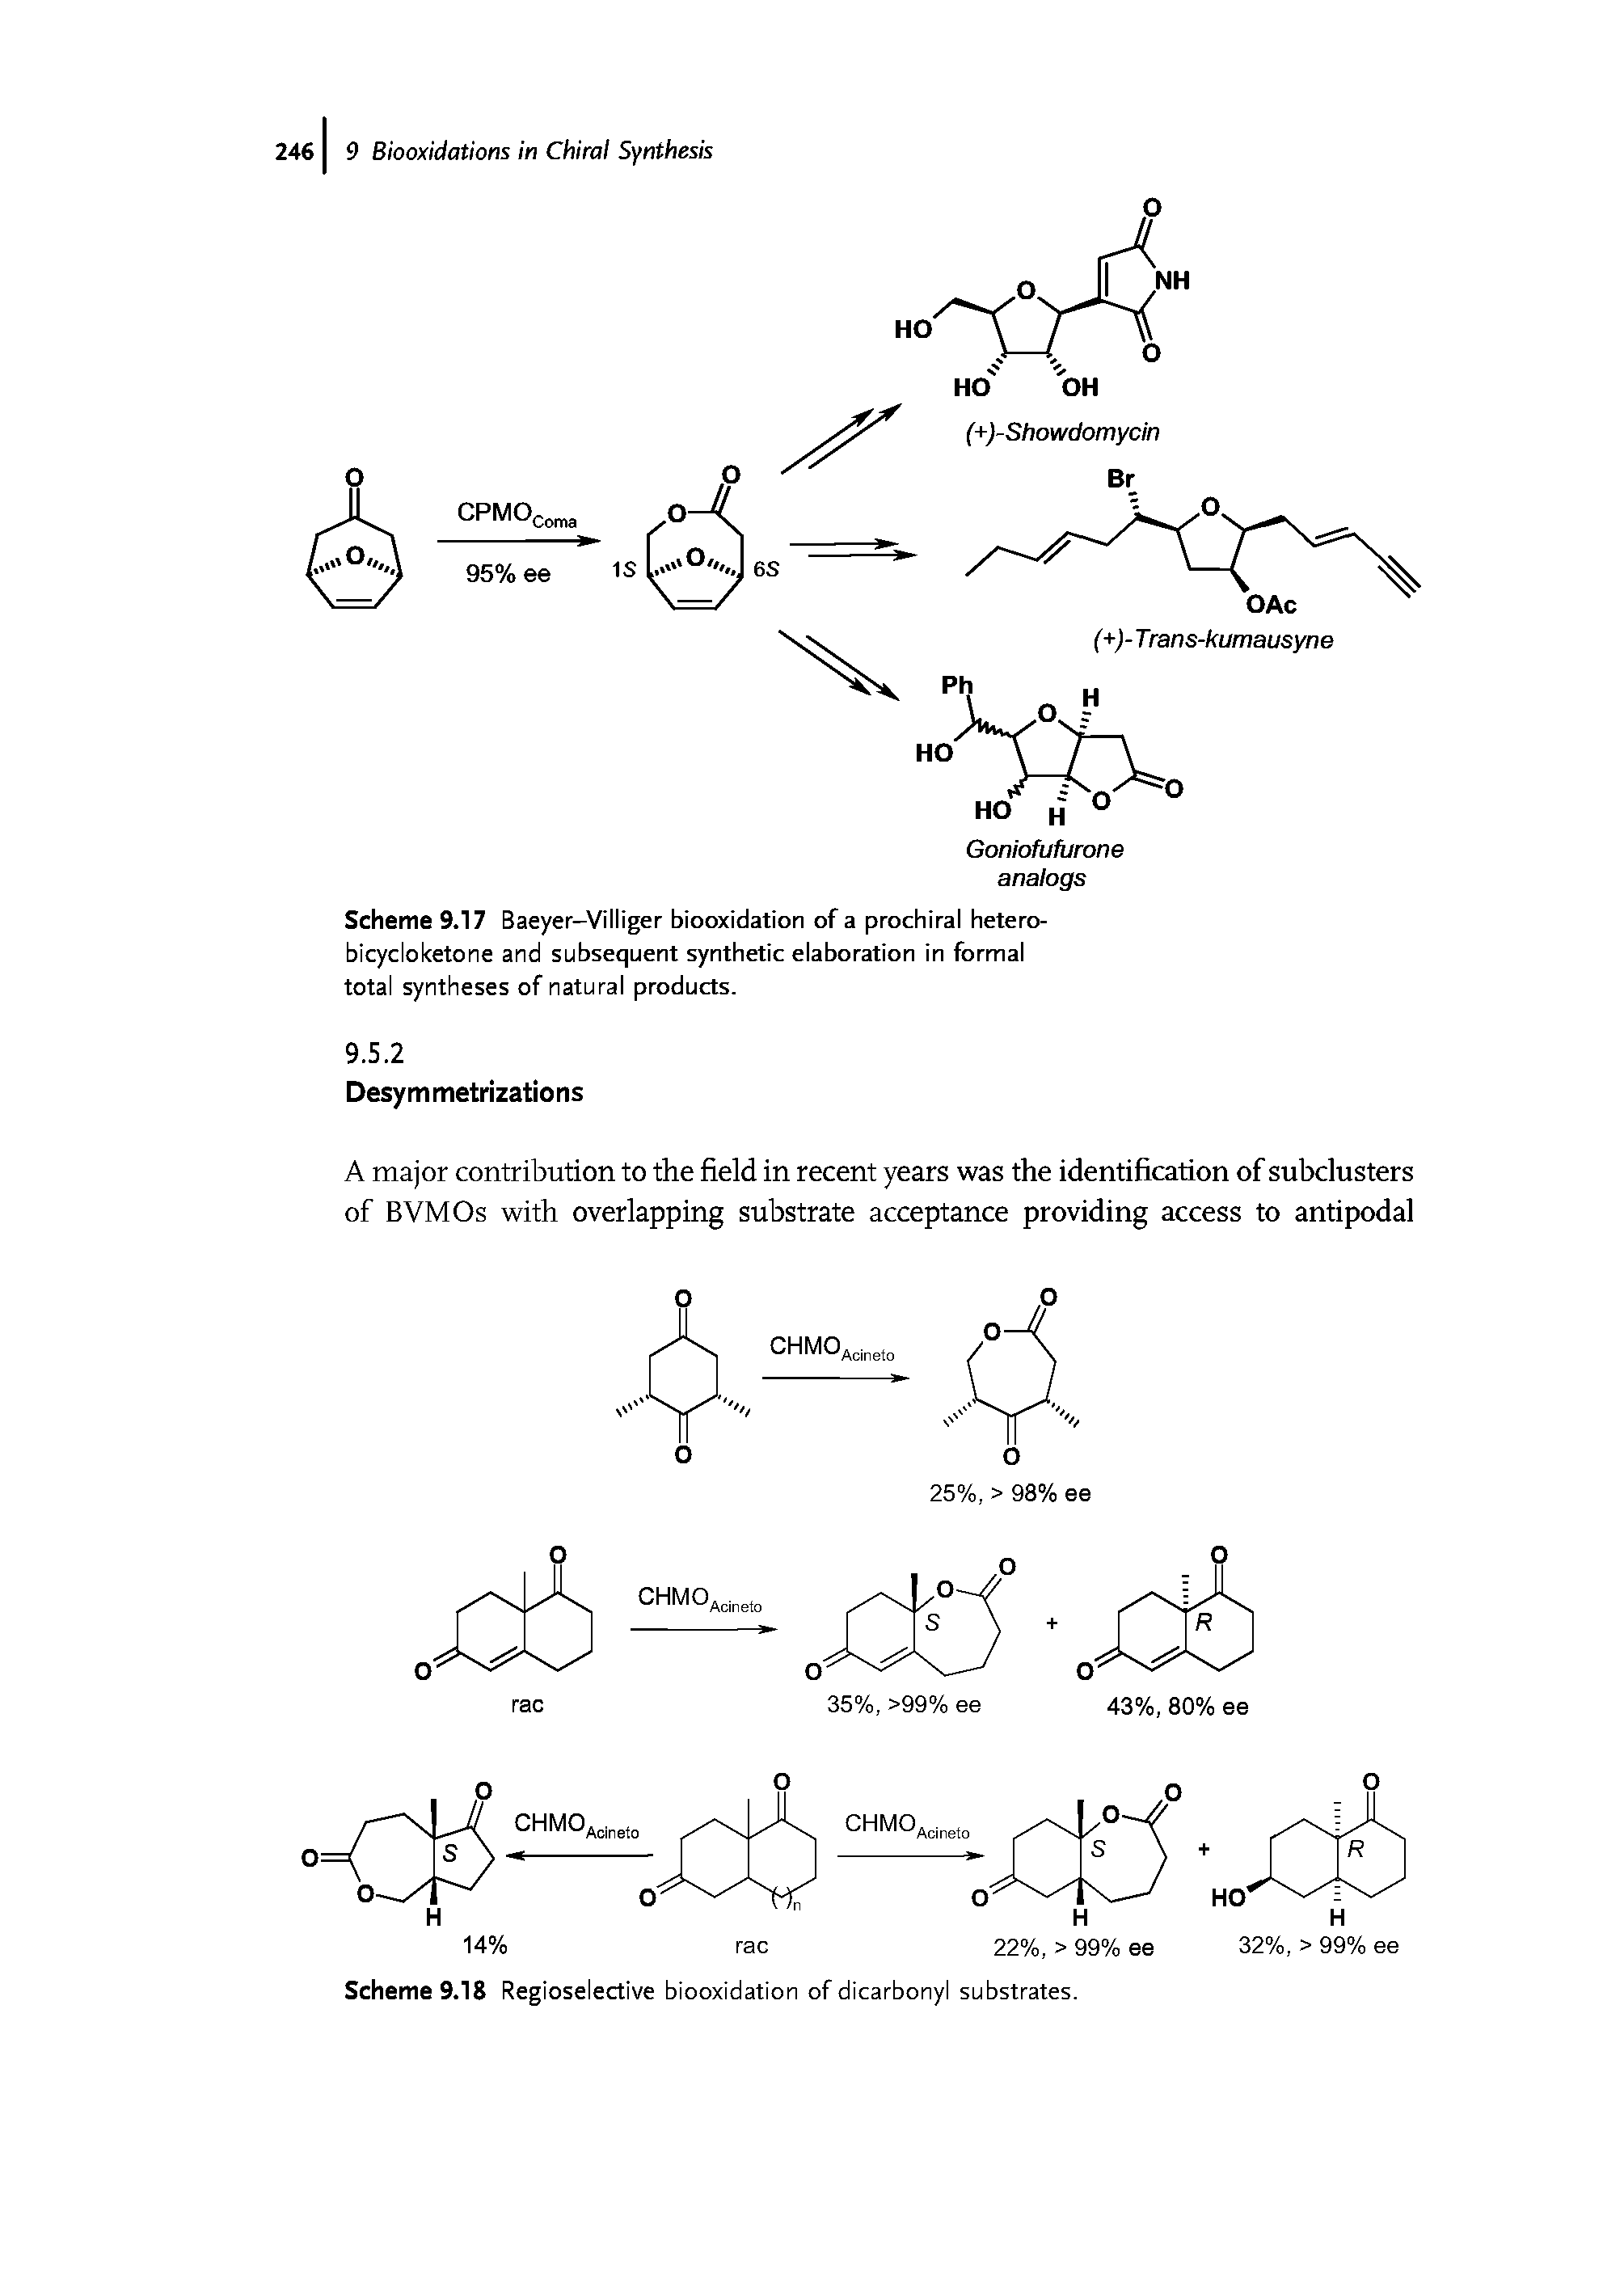 Scheme 9.17 Baeyer—Villiger biooxidation of a prochiral hetero-bicycloketone and subsequent synthetic elaboration in formal total syntheses of natural products.